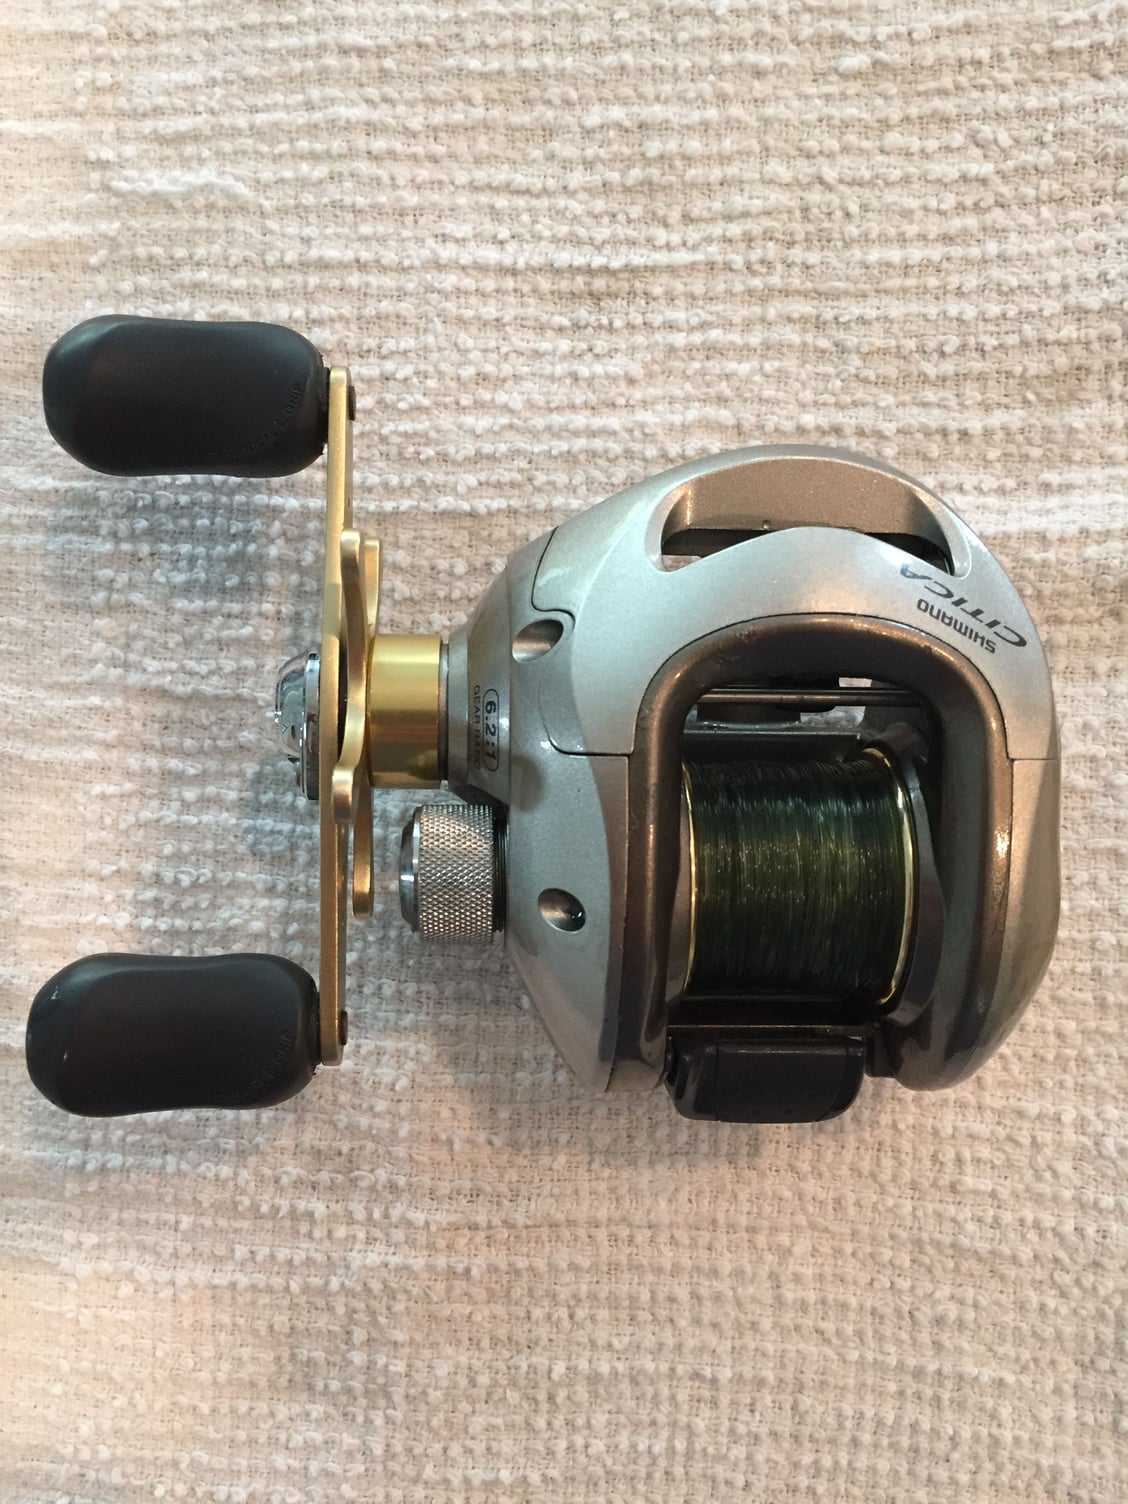 Shimano Citica baitcaster for sale - The Hull Truth - Boating and Fishing  Forum